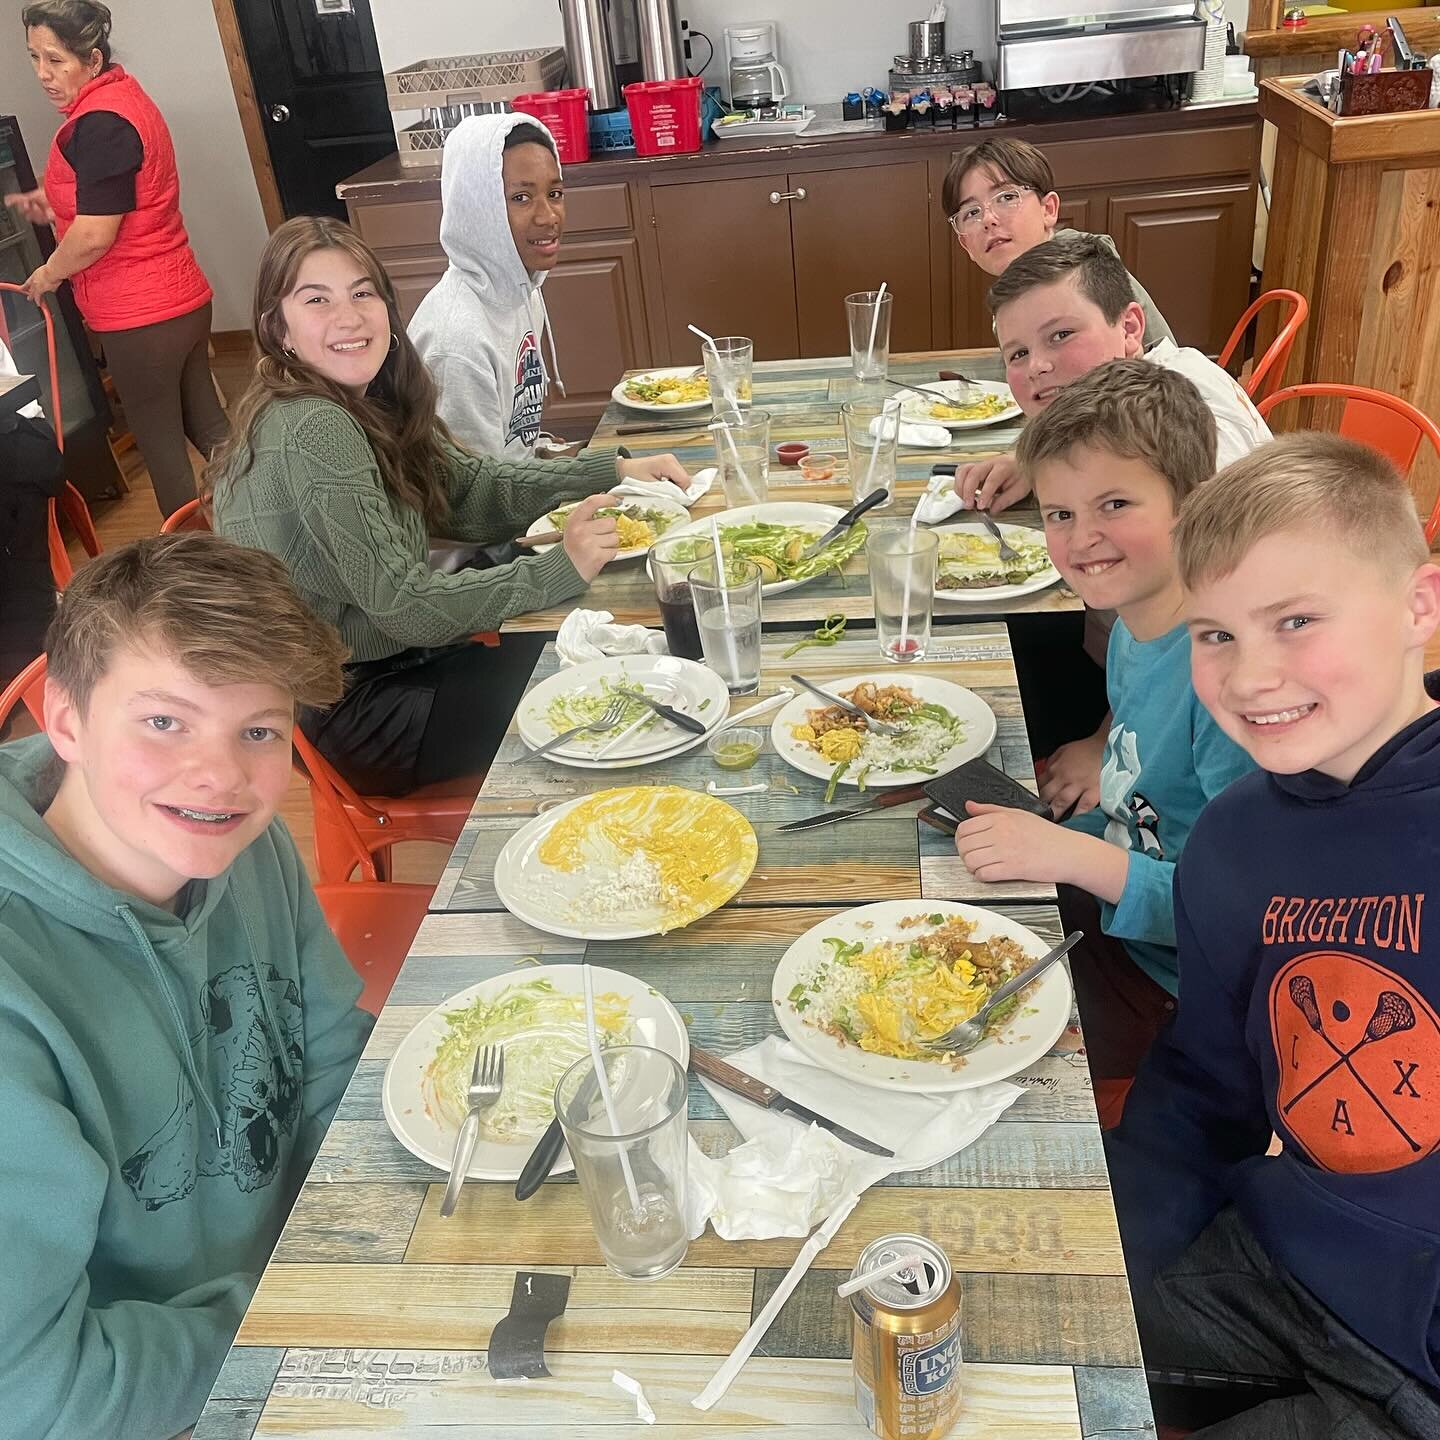 Middle school Spanish (6th-8th grade) put their Spanish speaking abilities to the test today on a lunch field trip with Mrs. Guy. Students ordered their meals in Spanish and enjoyed authentic Peruvian food as a result.